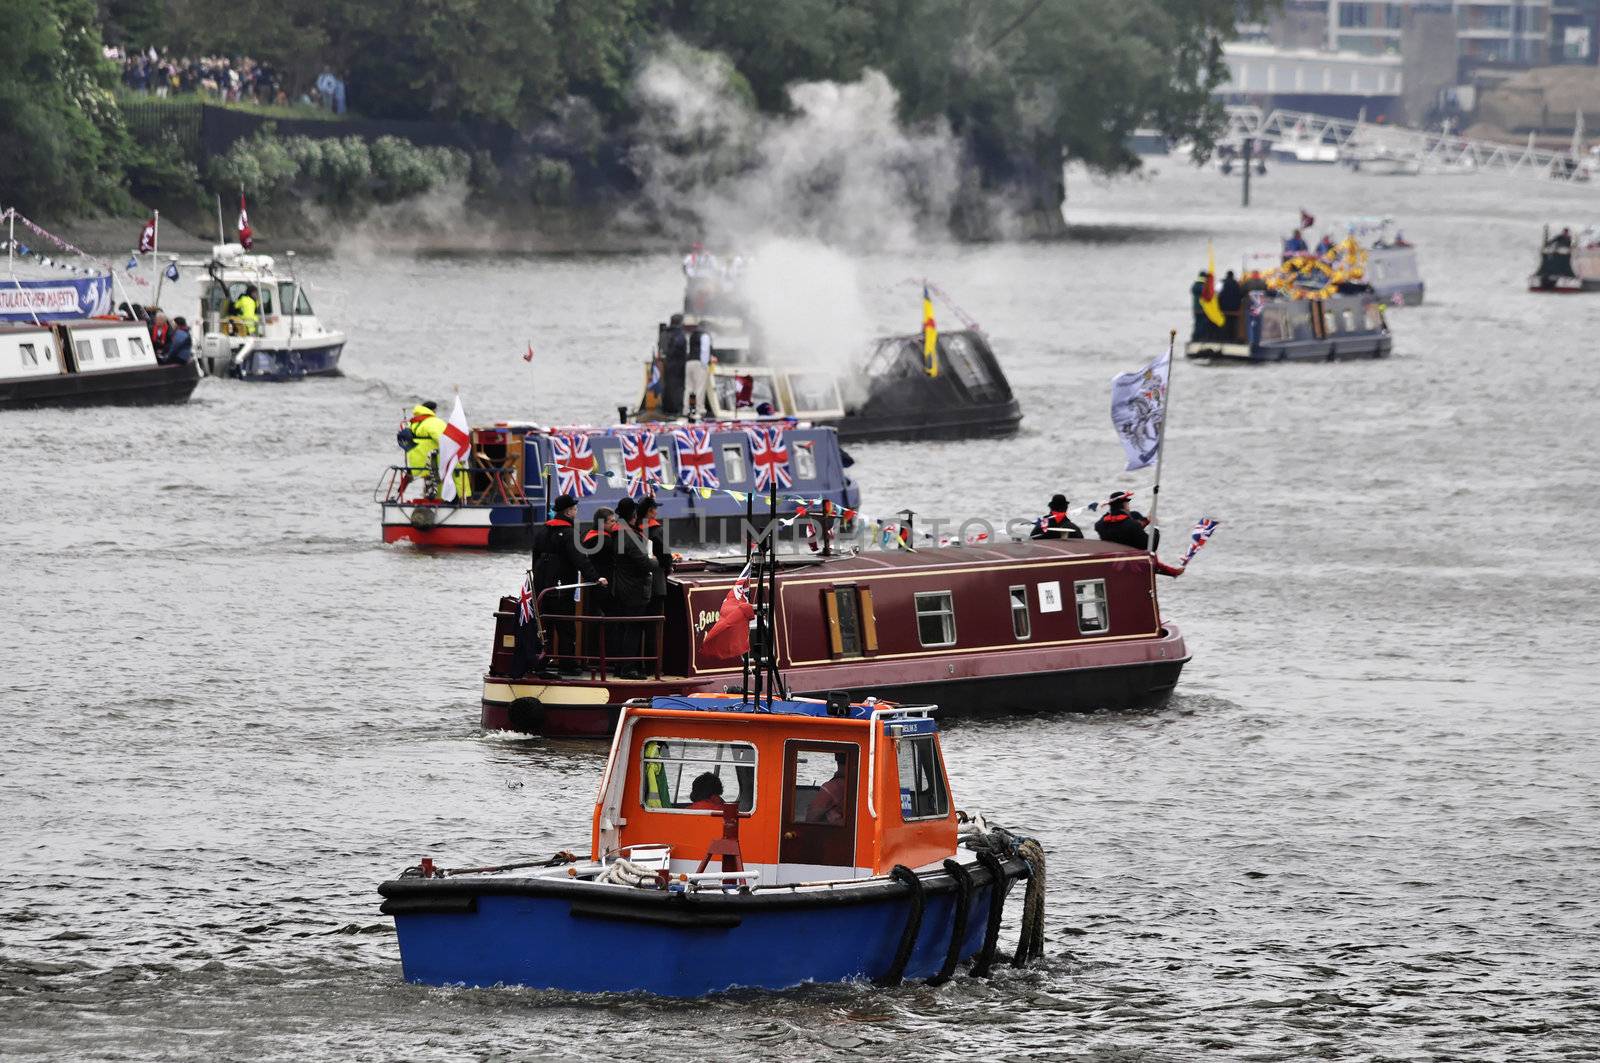 LONDON, UK, Sunday June 3, 2012. Hundred of boats muster on the river Thames in Putney (west London) for the Thames Diamond Jubilee Pageant to celebrate the Queen's Diamond Jubilee.